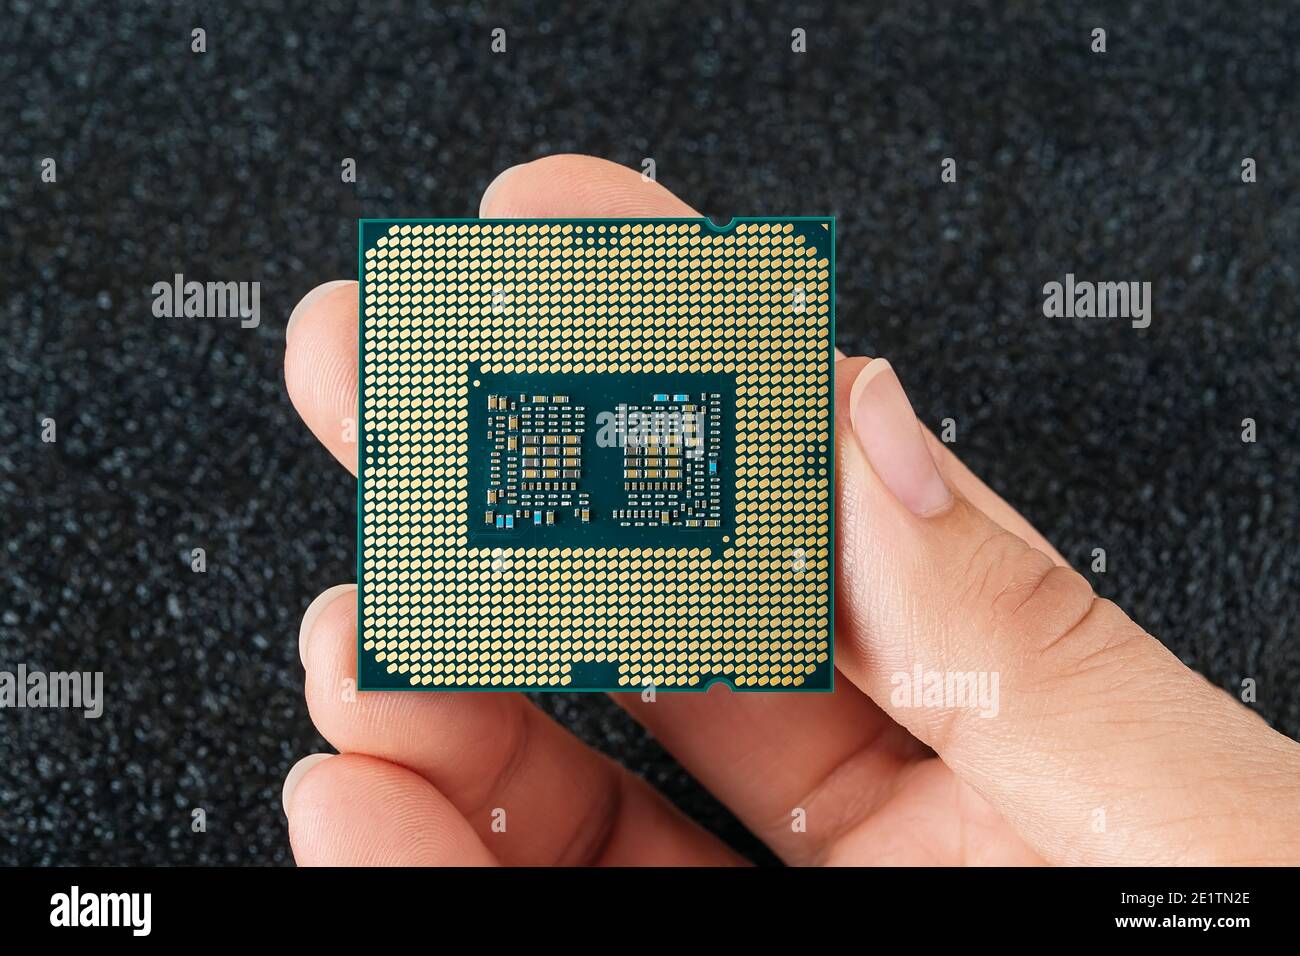 Woman fingers hold pc micro CPU with gold plated contacts against dark background. Modern central processing unit close-up. Desktop computer hardware Stock Photo